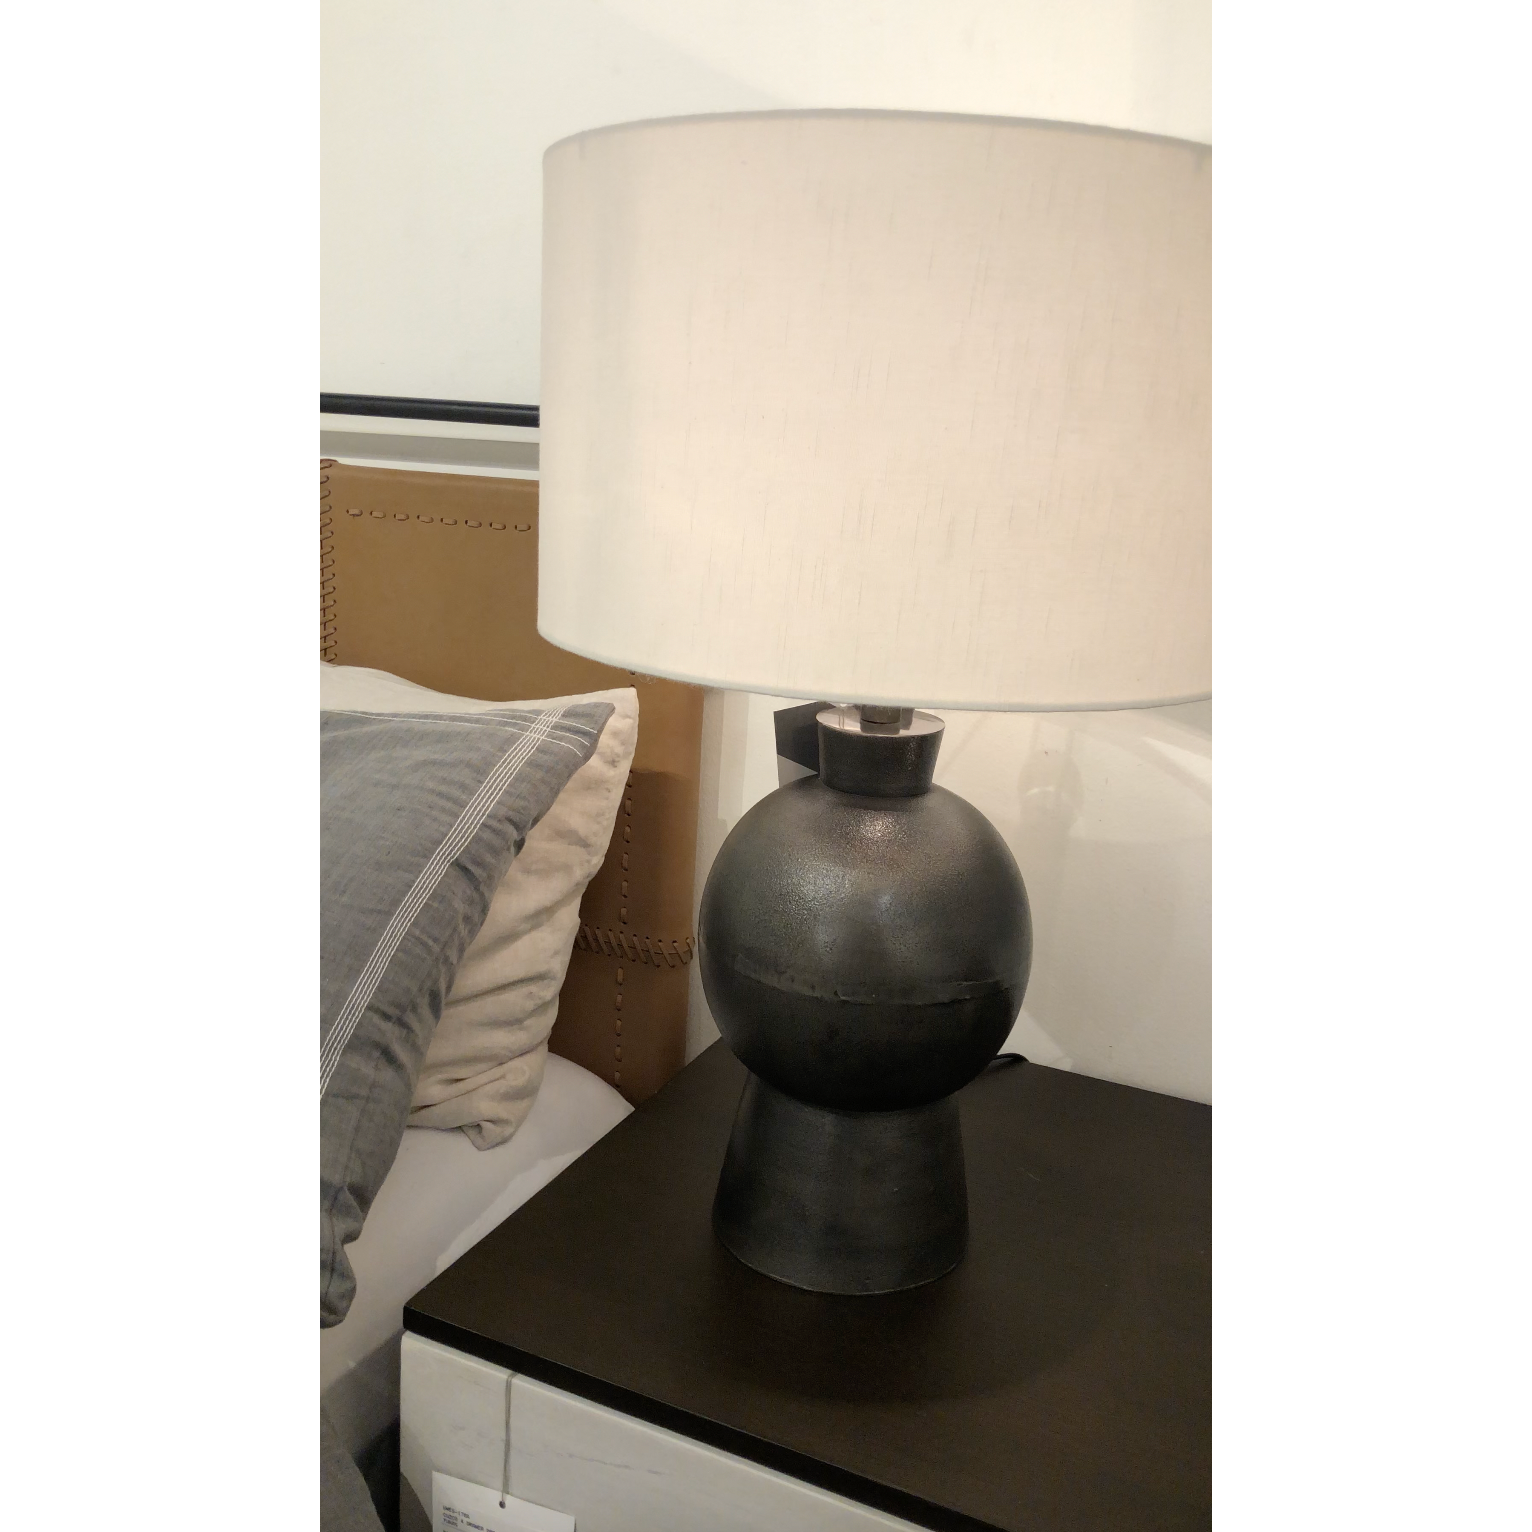 Textured black aluminum forms a shapely base to beautifully complement a white silk shade with this Kelita Table Lamp - Textured Black Alu. A beautiful lamp to place next your bed, sofa, or other area needing extra light.   Overall Dimensions: 16.00"w x 16.00"d x 25.00"h  Colors: Textured Black Aluminum, White Silk Materials: Aluminum, 60%Polyester/40%Viscose